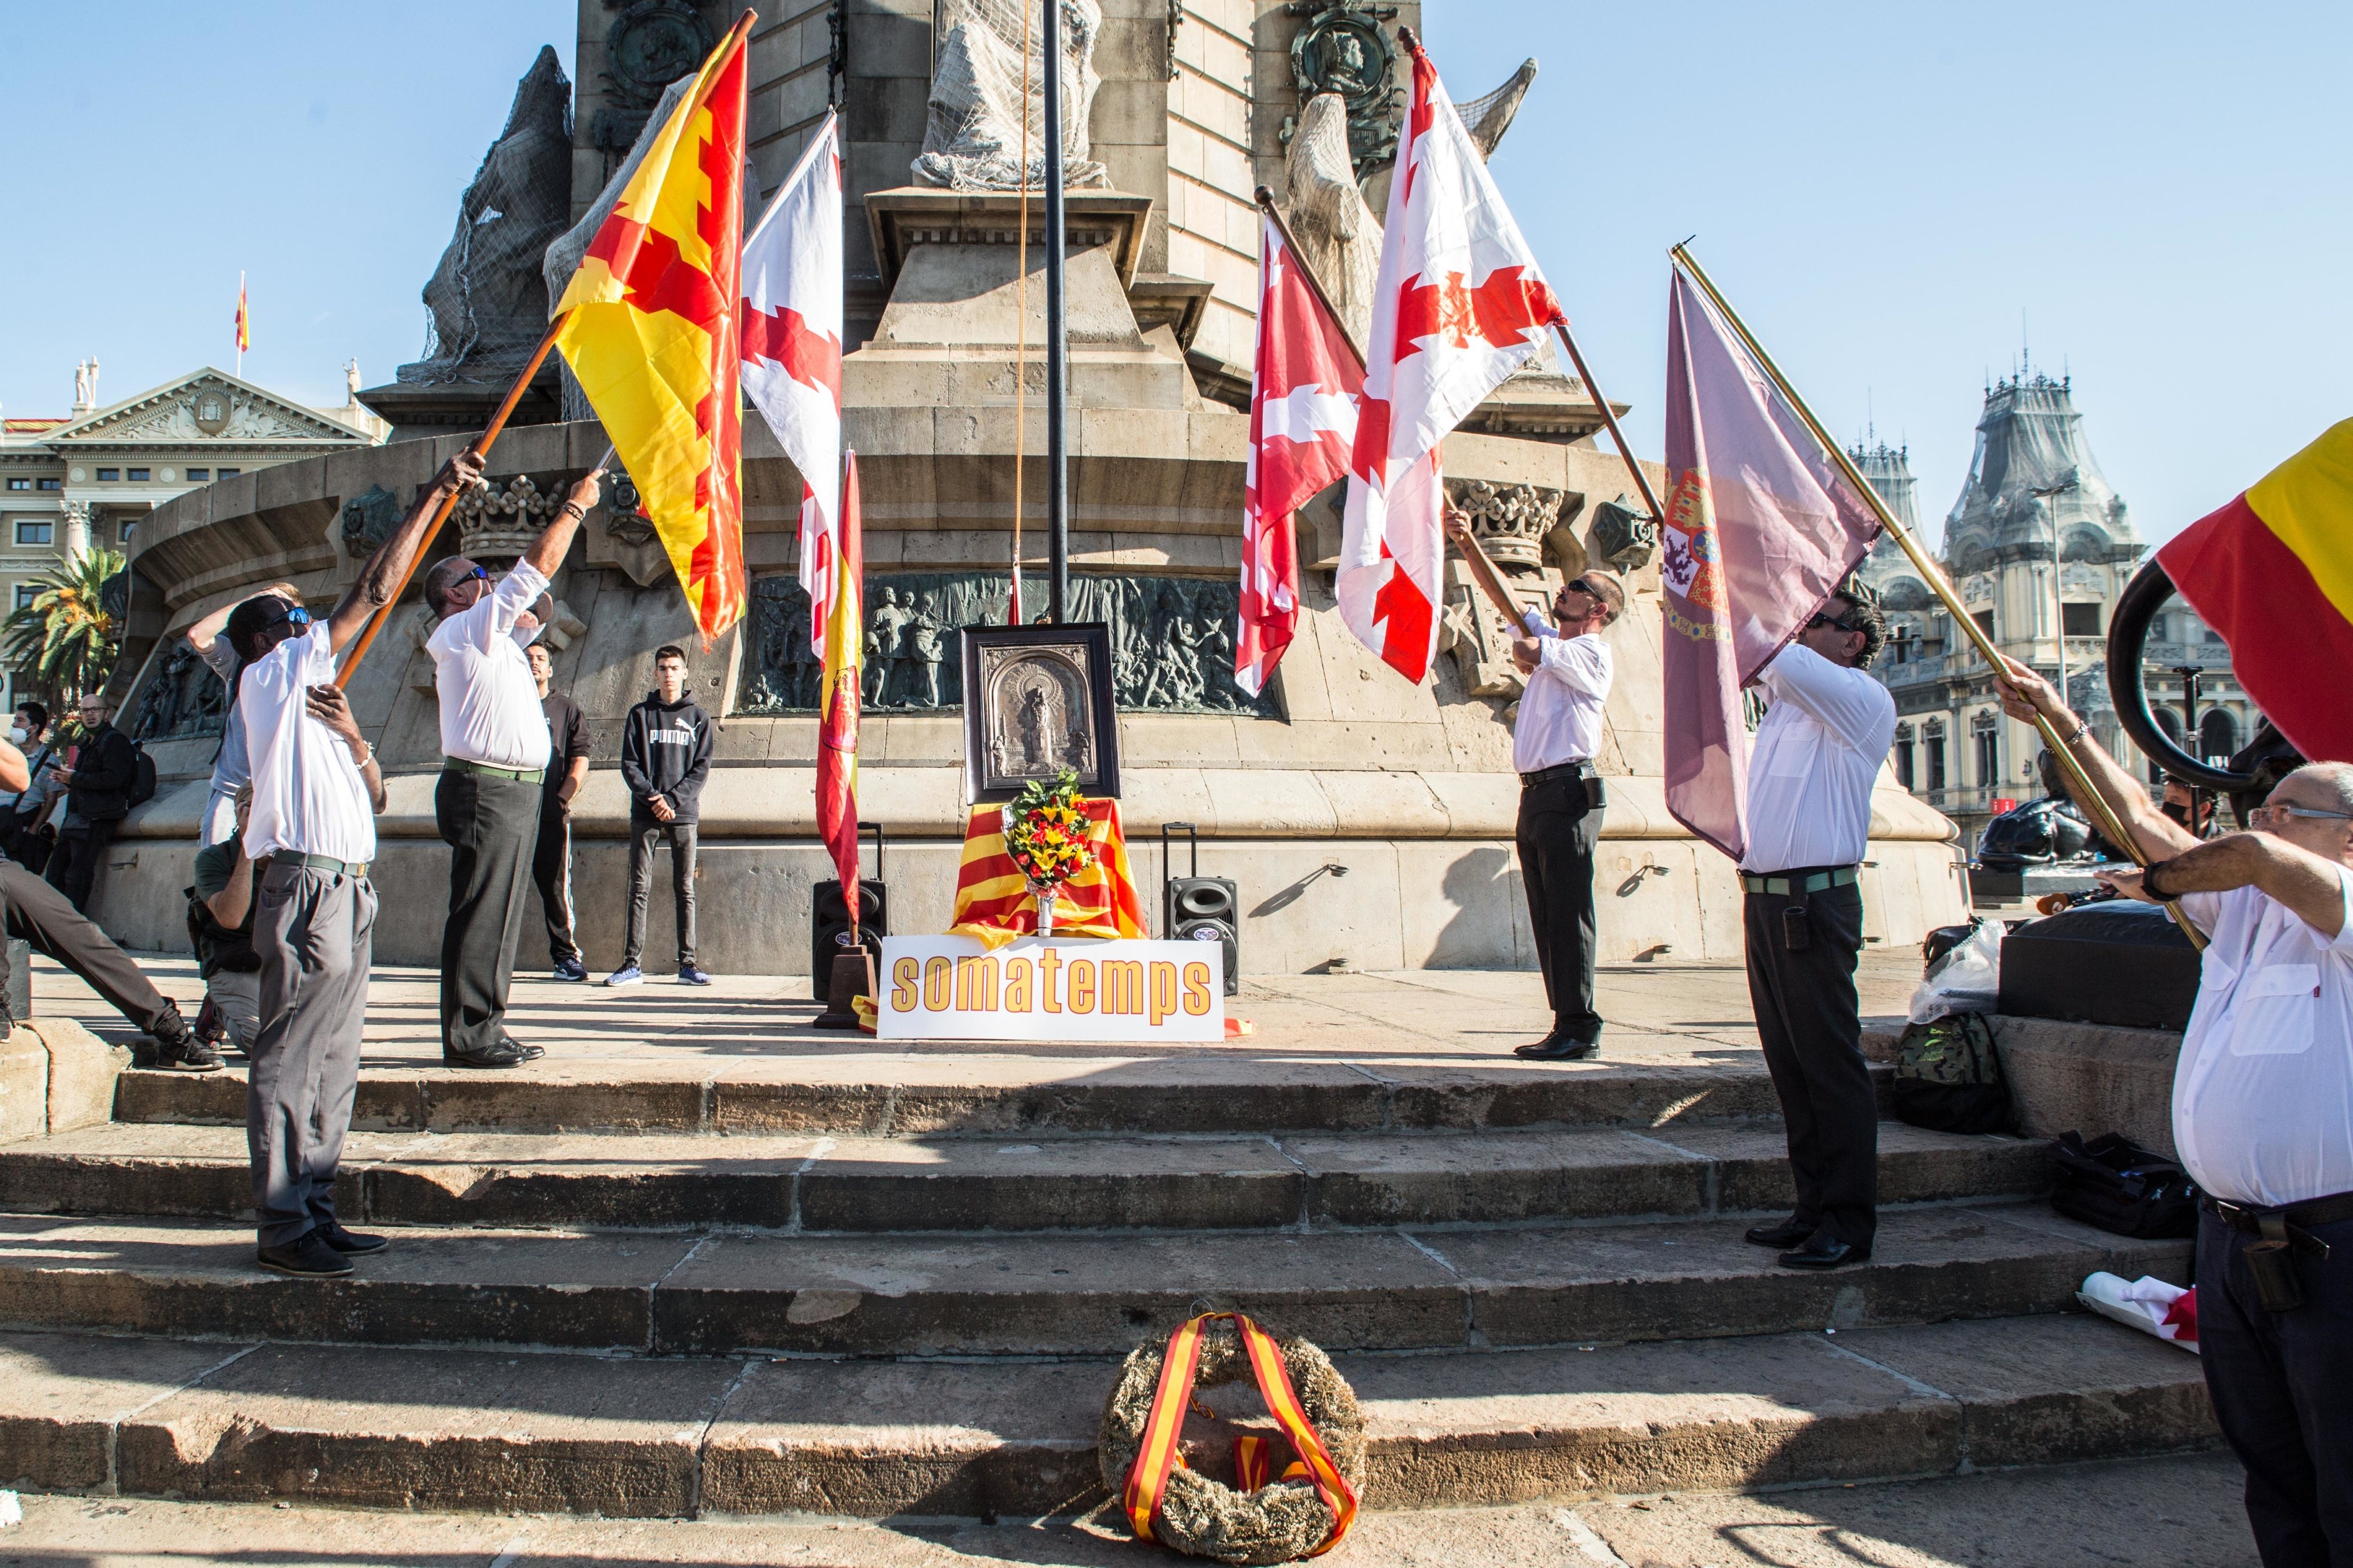 Men seen with flags of the Cross of Burgundy in wreath to